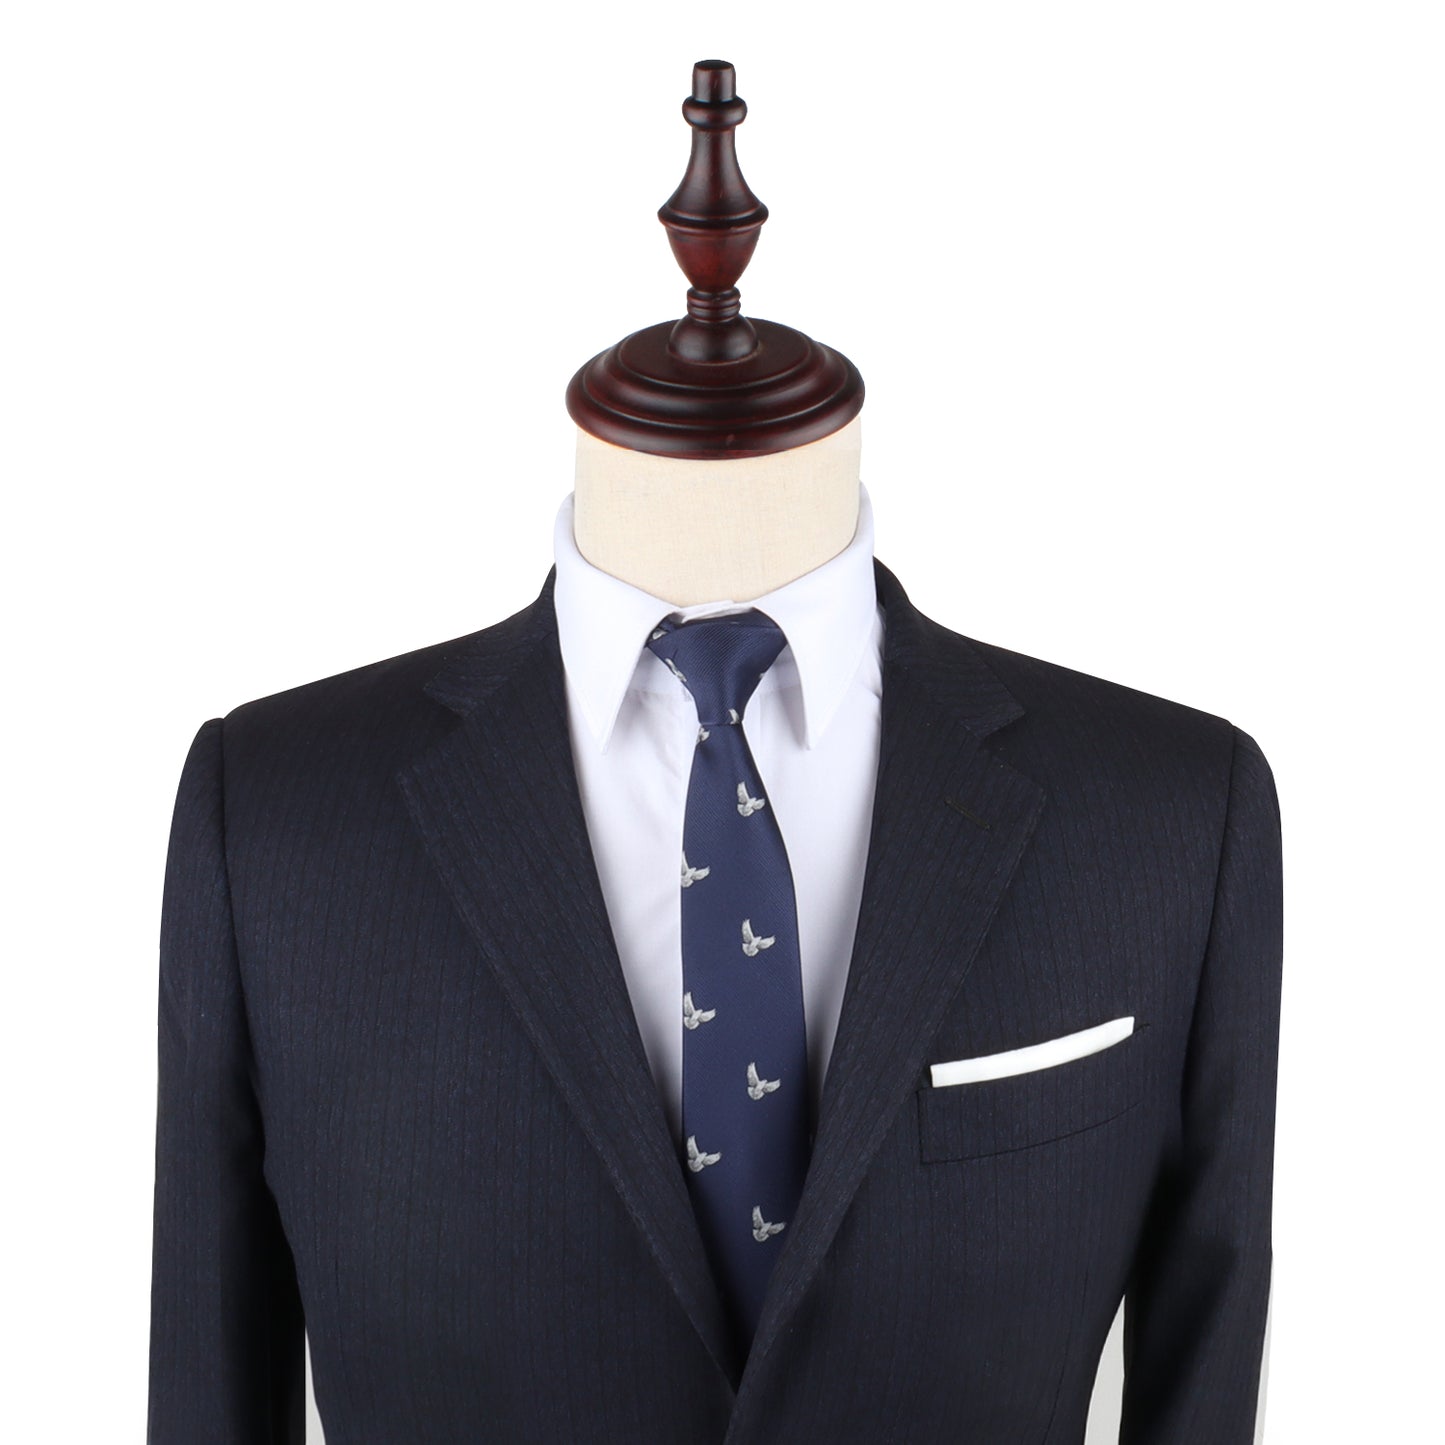 A symbolic mannequin exuding style in a Dove Skinny Tie.